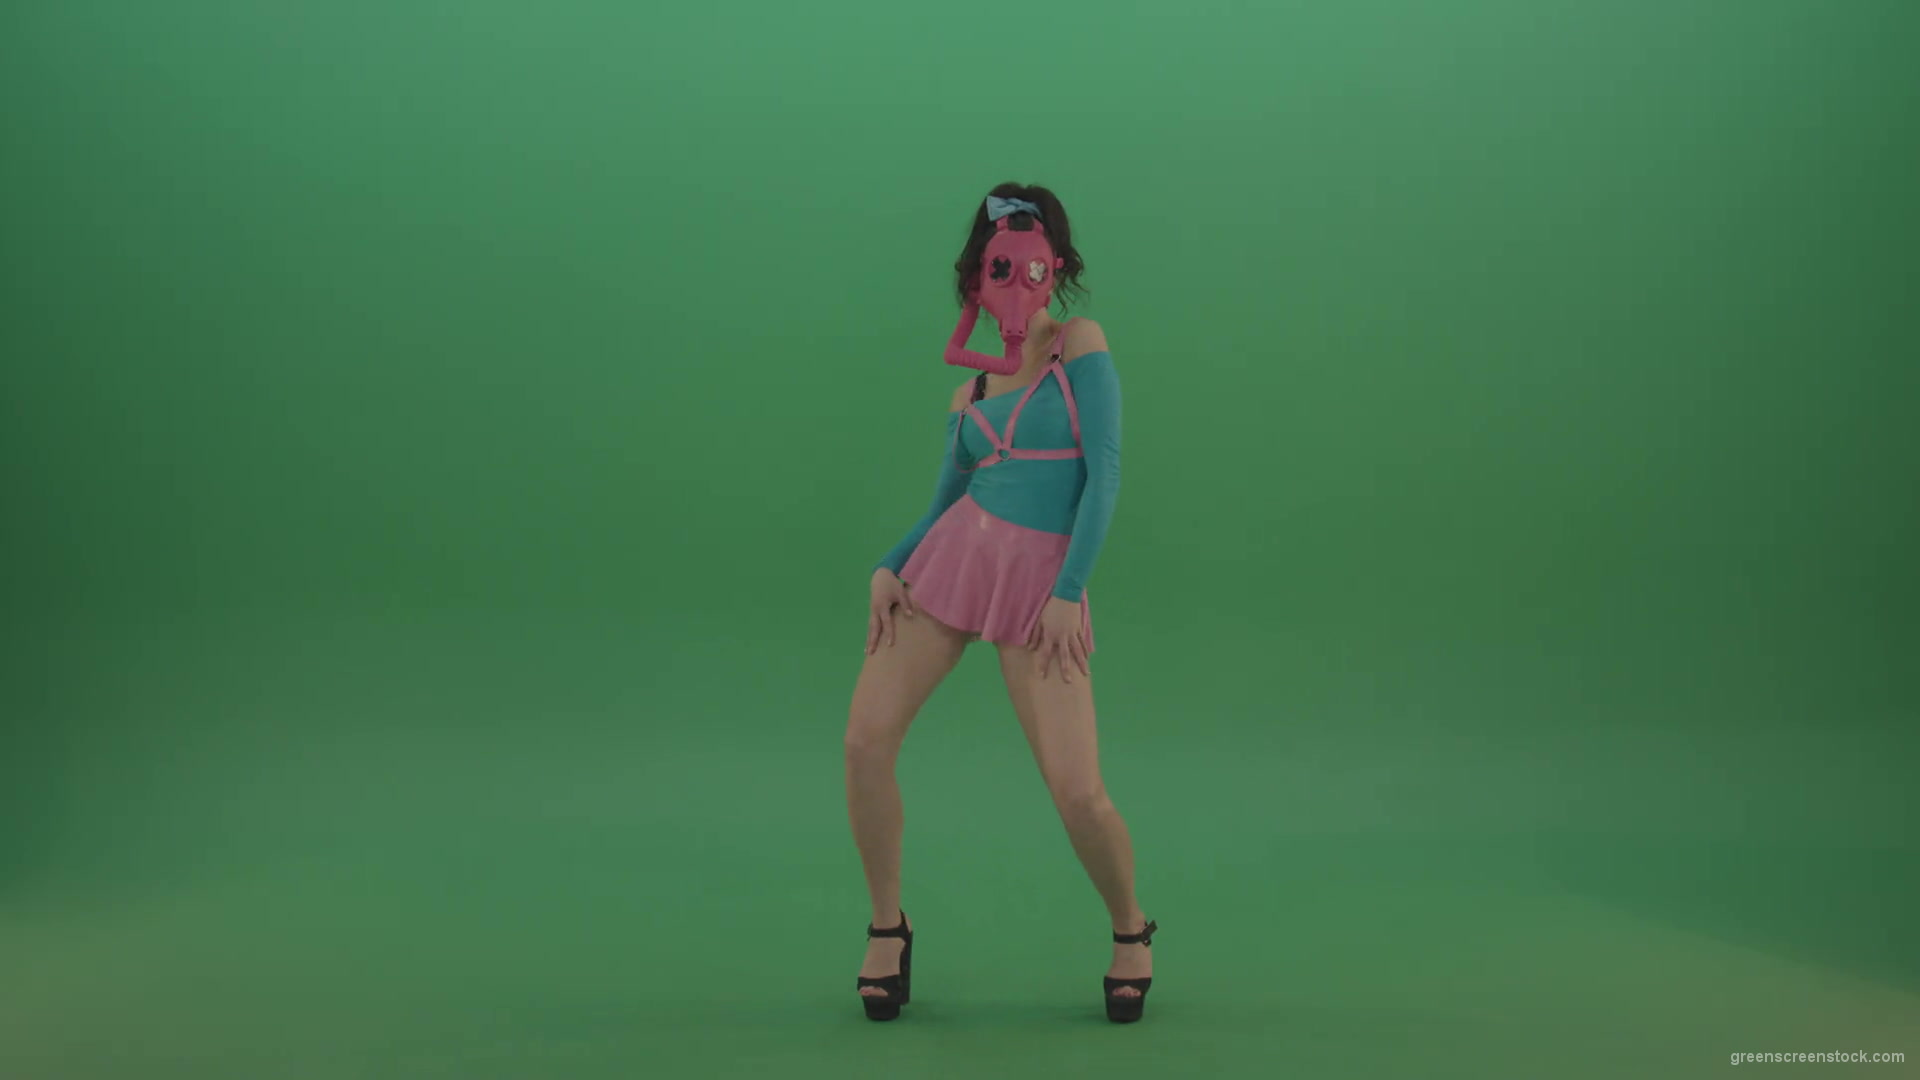 Fetish-Go-Go-Girl-dancing-in-pink-gas-mask-over-green-screen-4K-Video-Footage-1920_002 Green Screen Stock